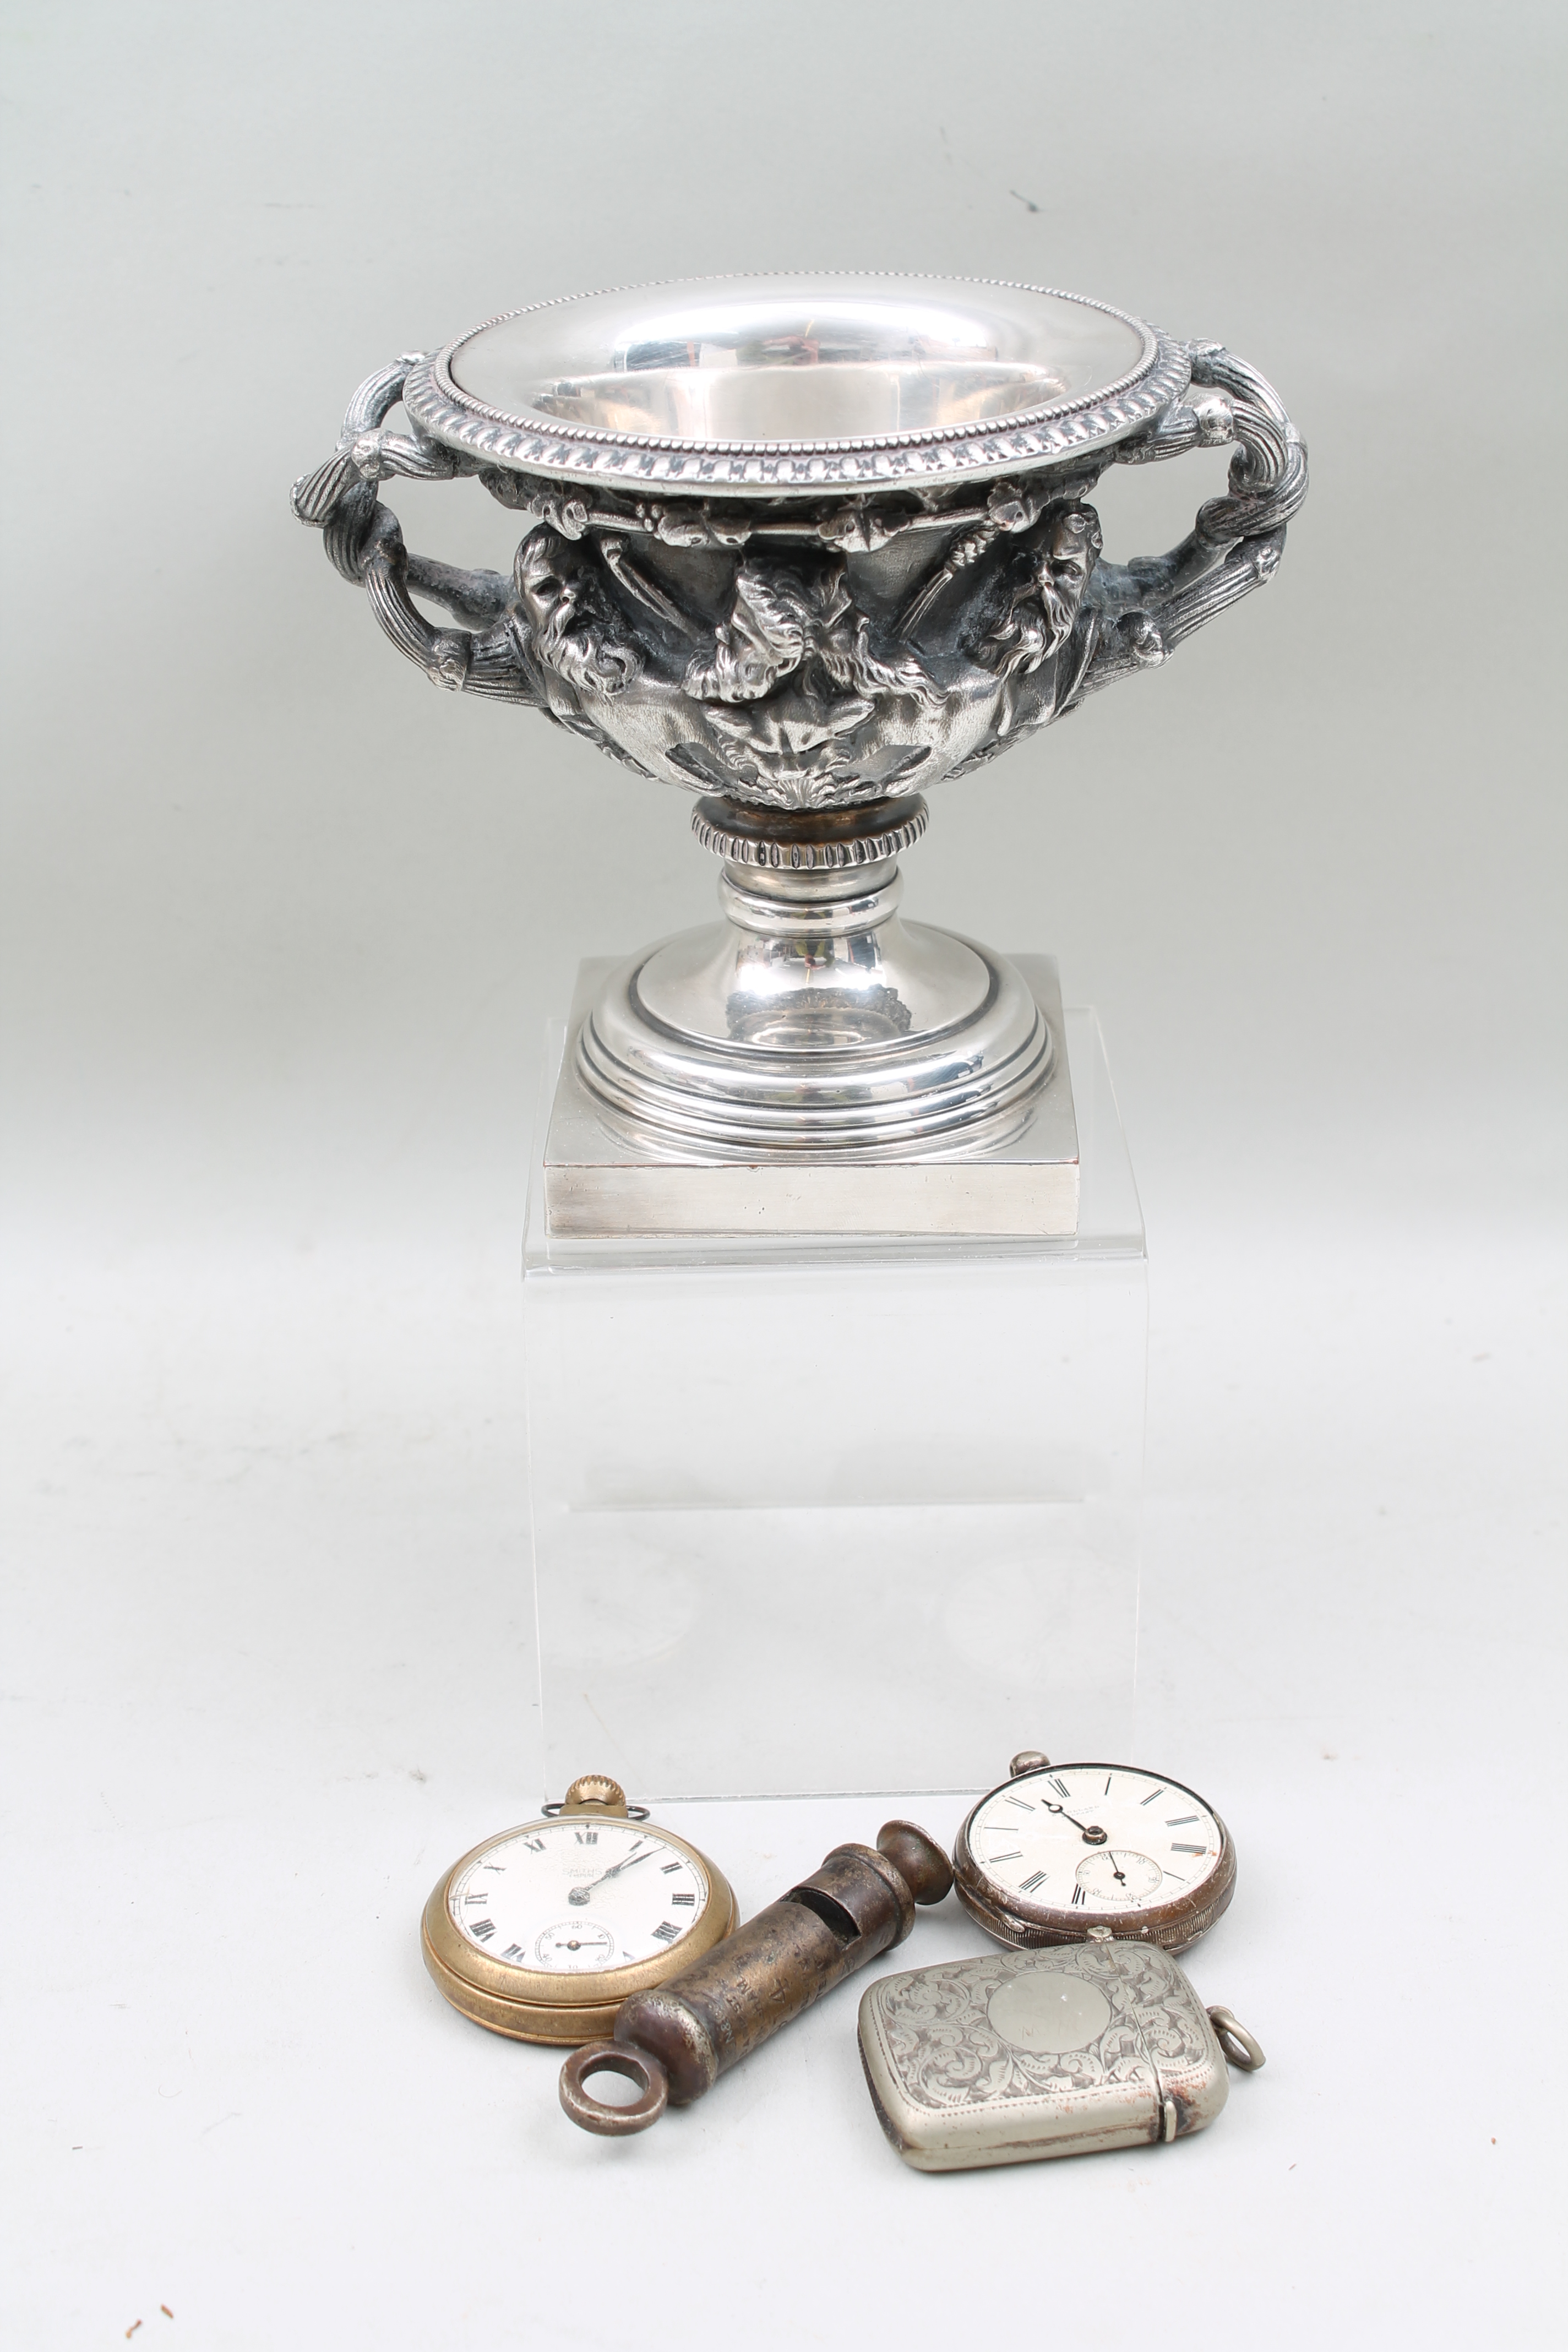 A 1914 white metal whistle by J Hudson and Co, a silver pocket watch a/f, a gold plated pocket